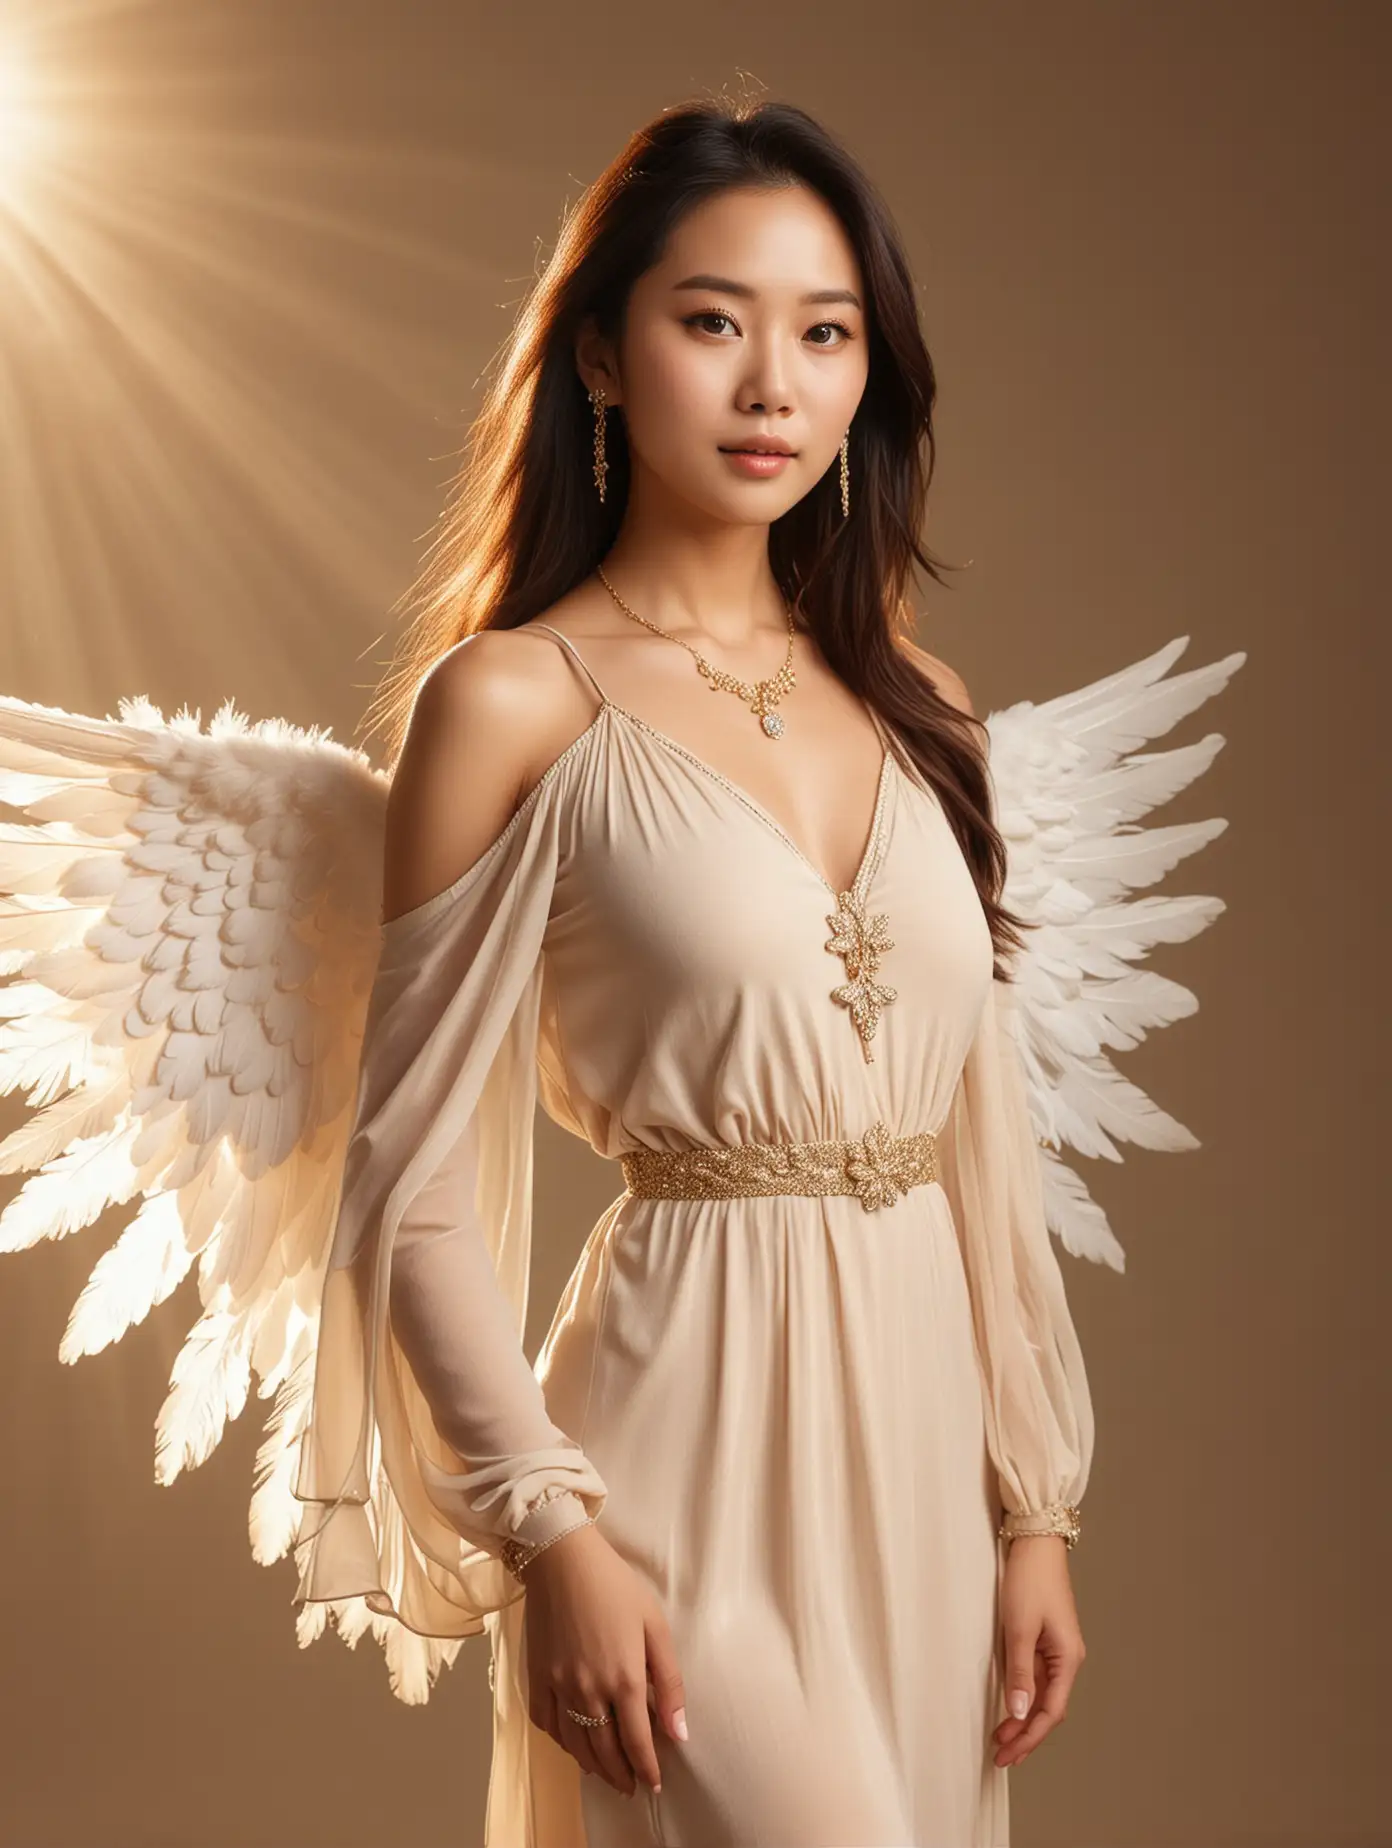 Confident Asian Angel Woman in Beige Dress with White Wings and Jewelry in Golden Light